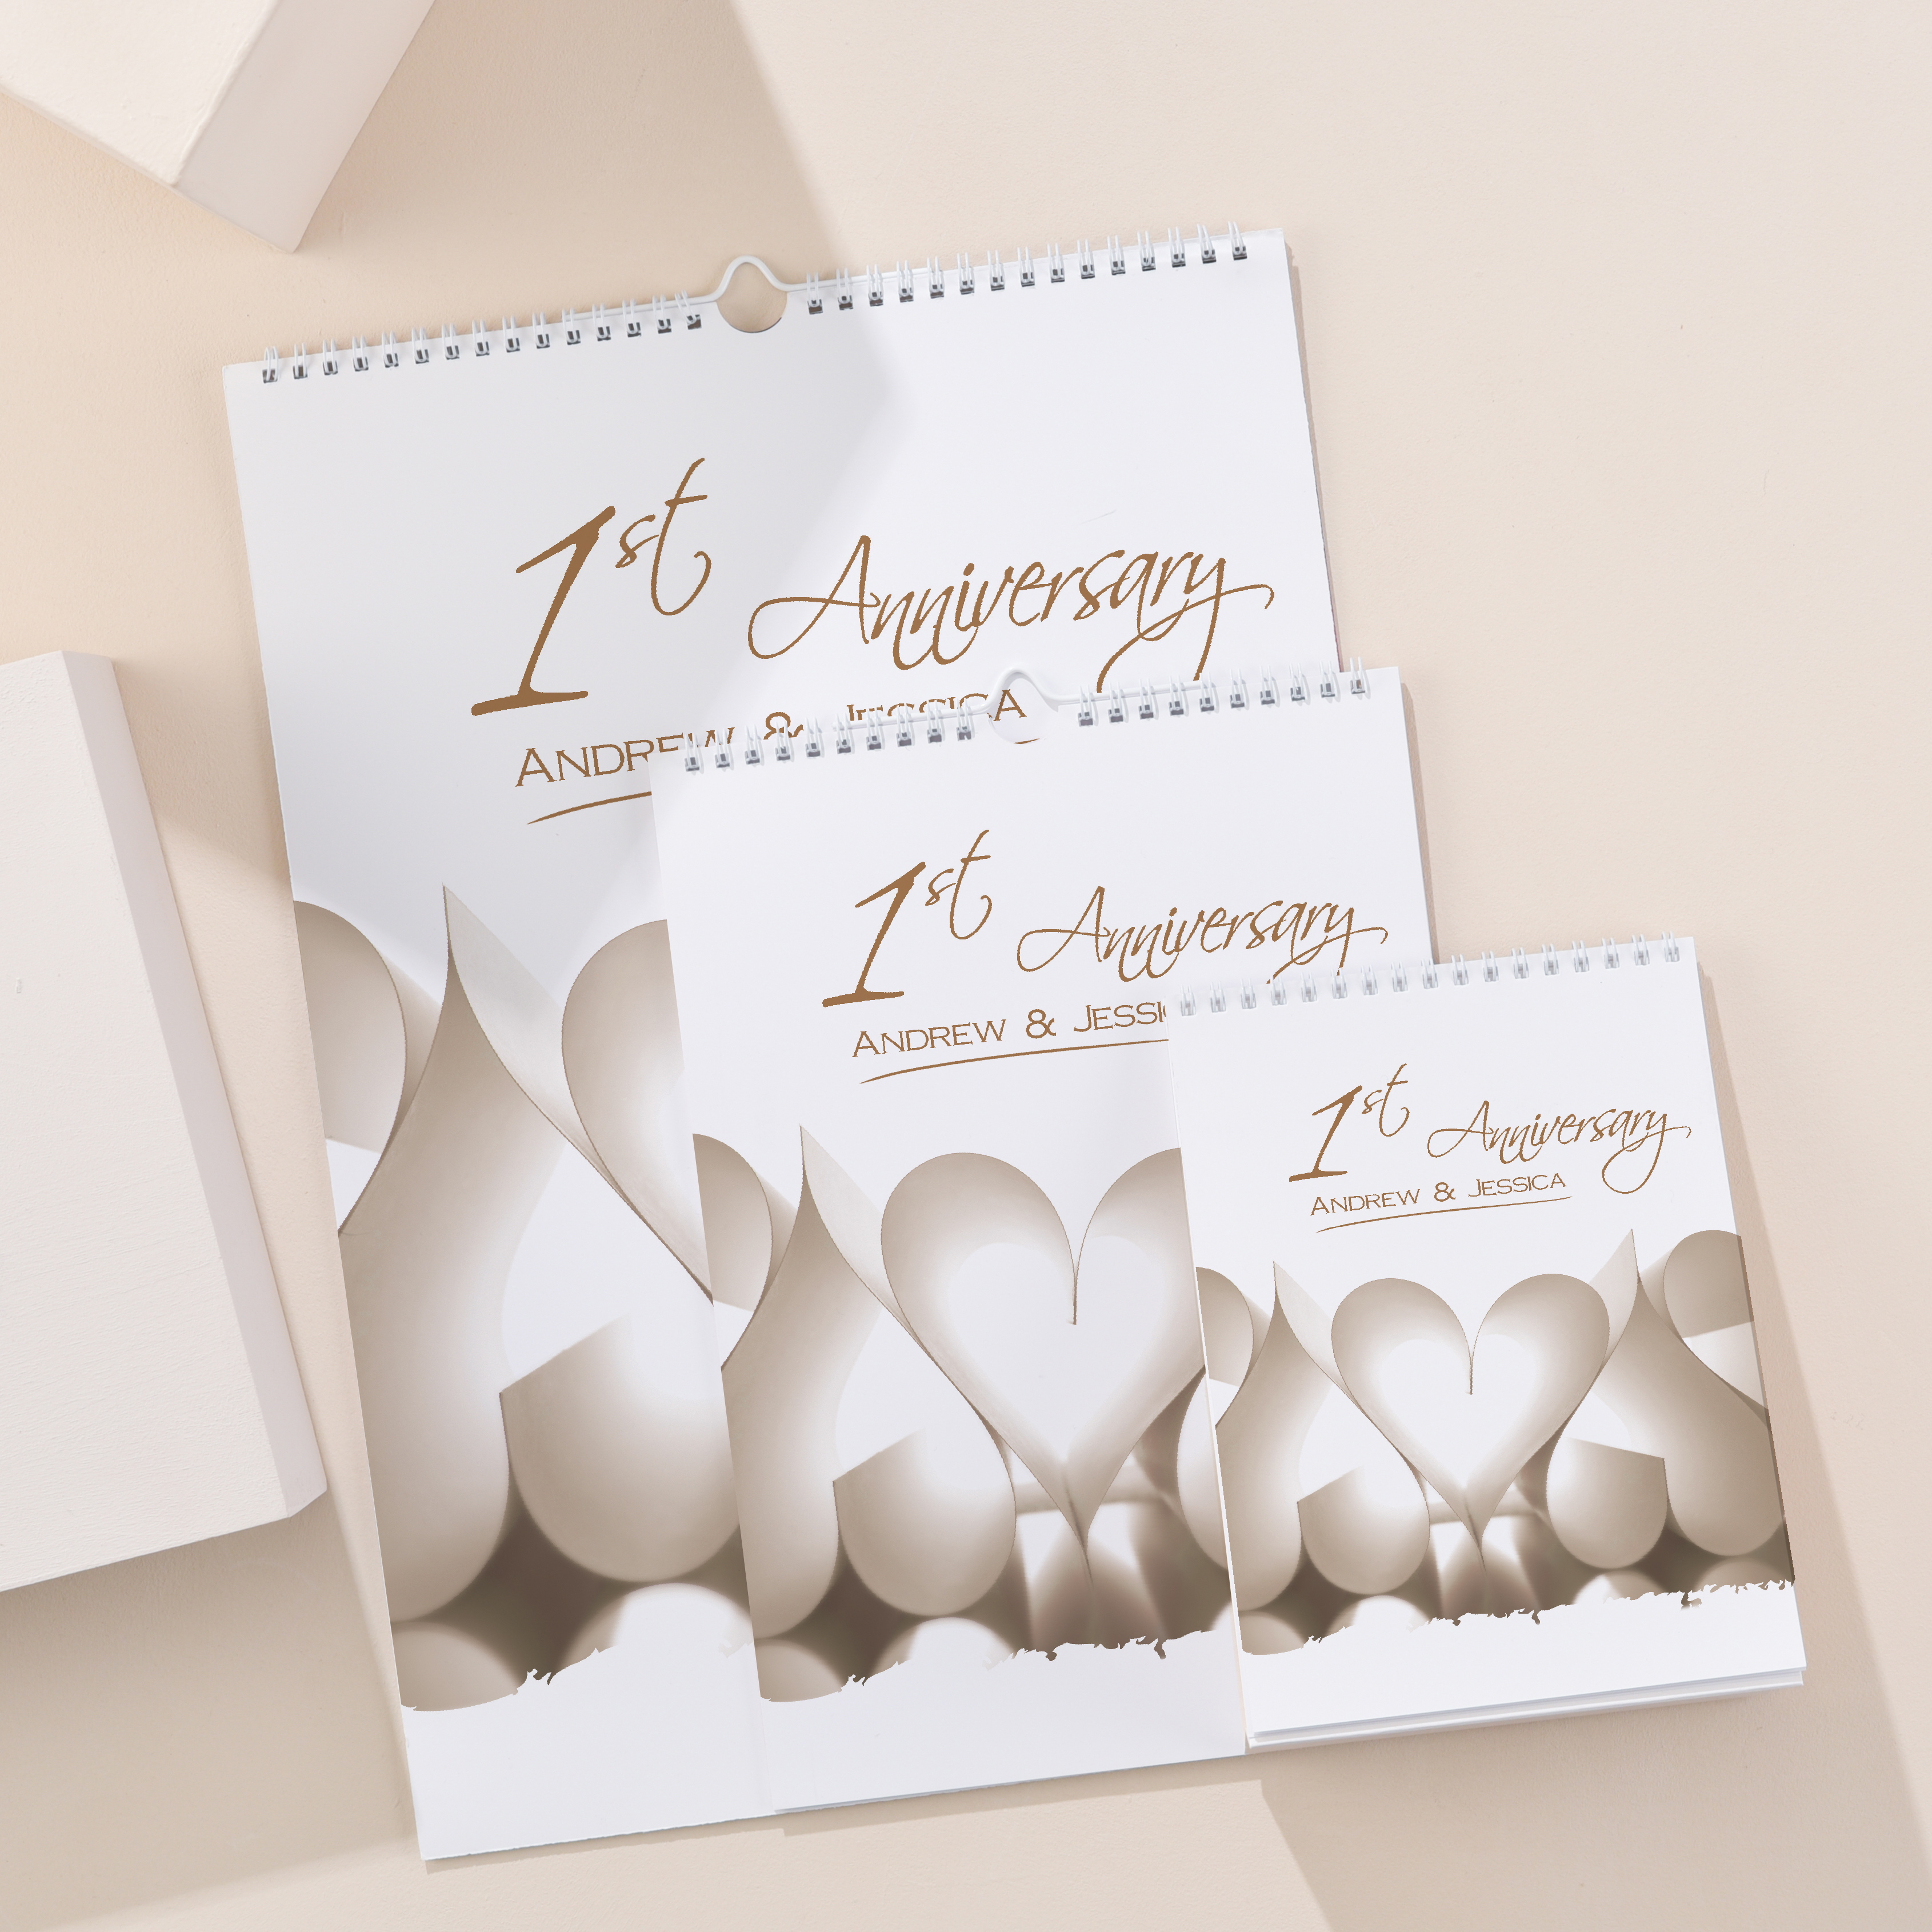 Personalised Paper Anniversary Calendar - 1st Edition